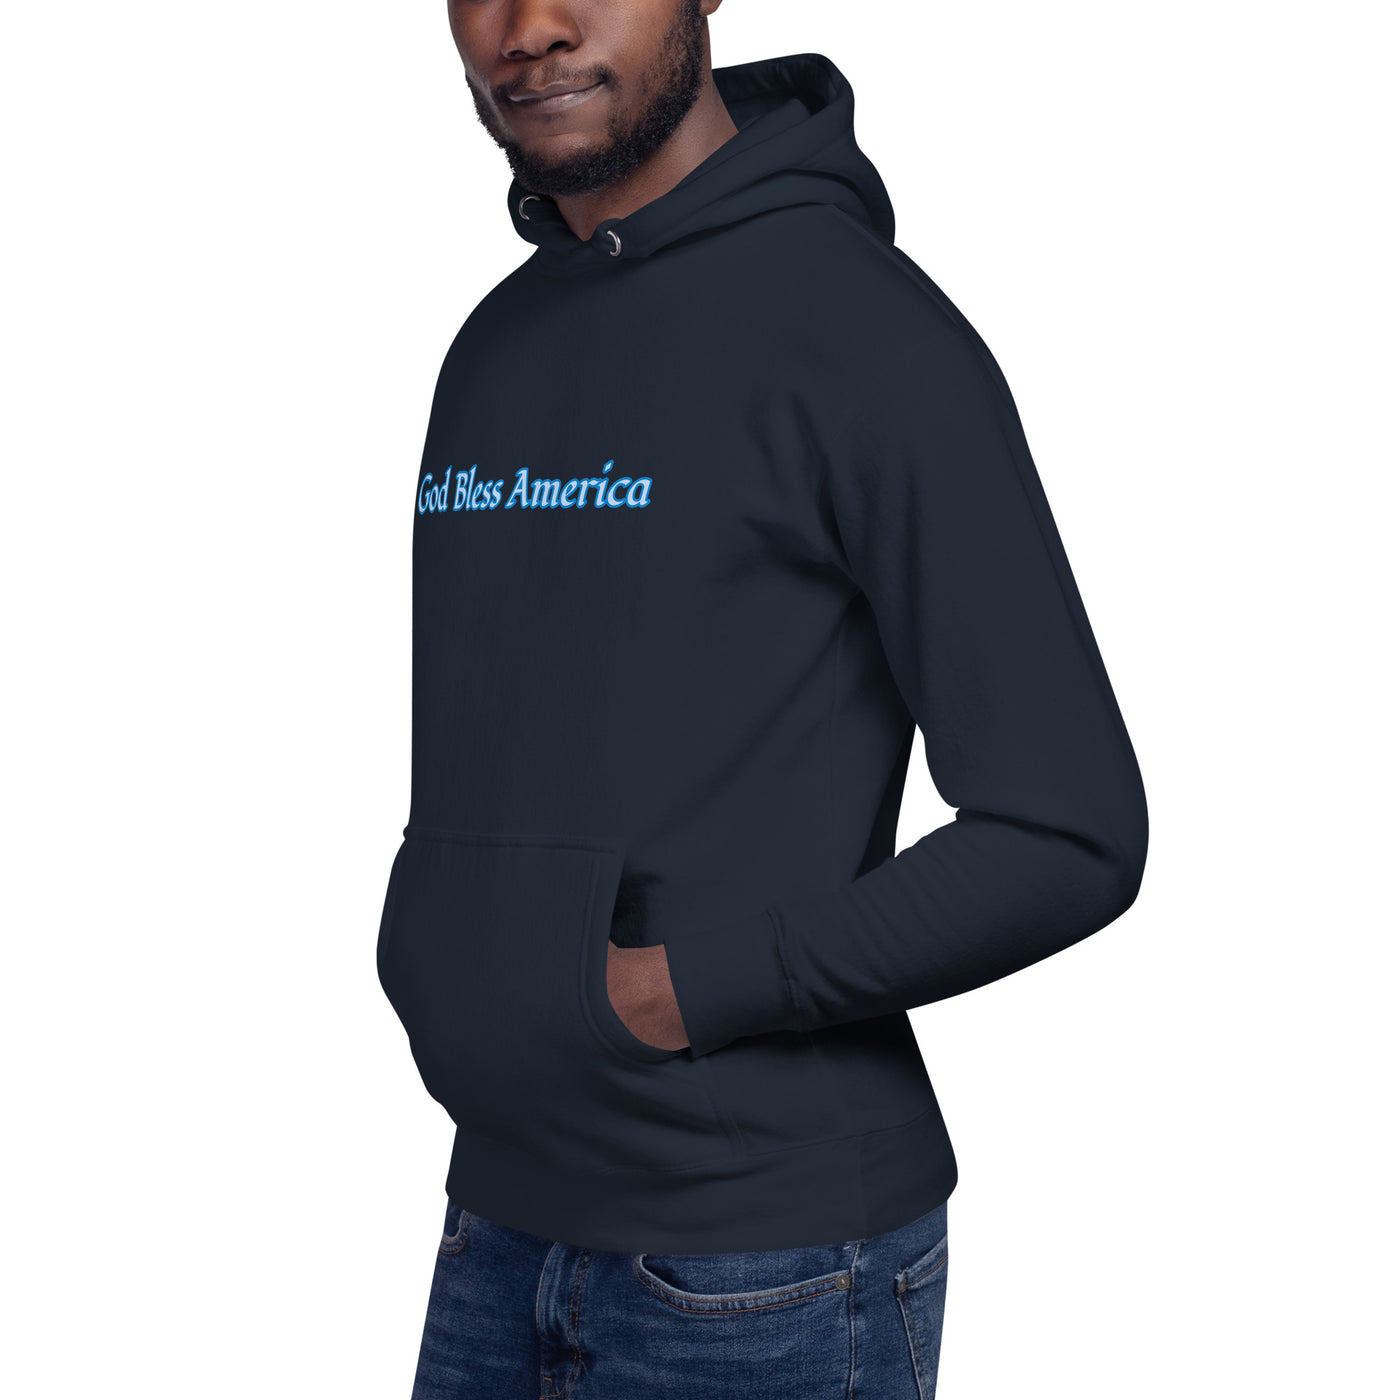 God Bless America Collection Hoodie